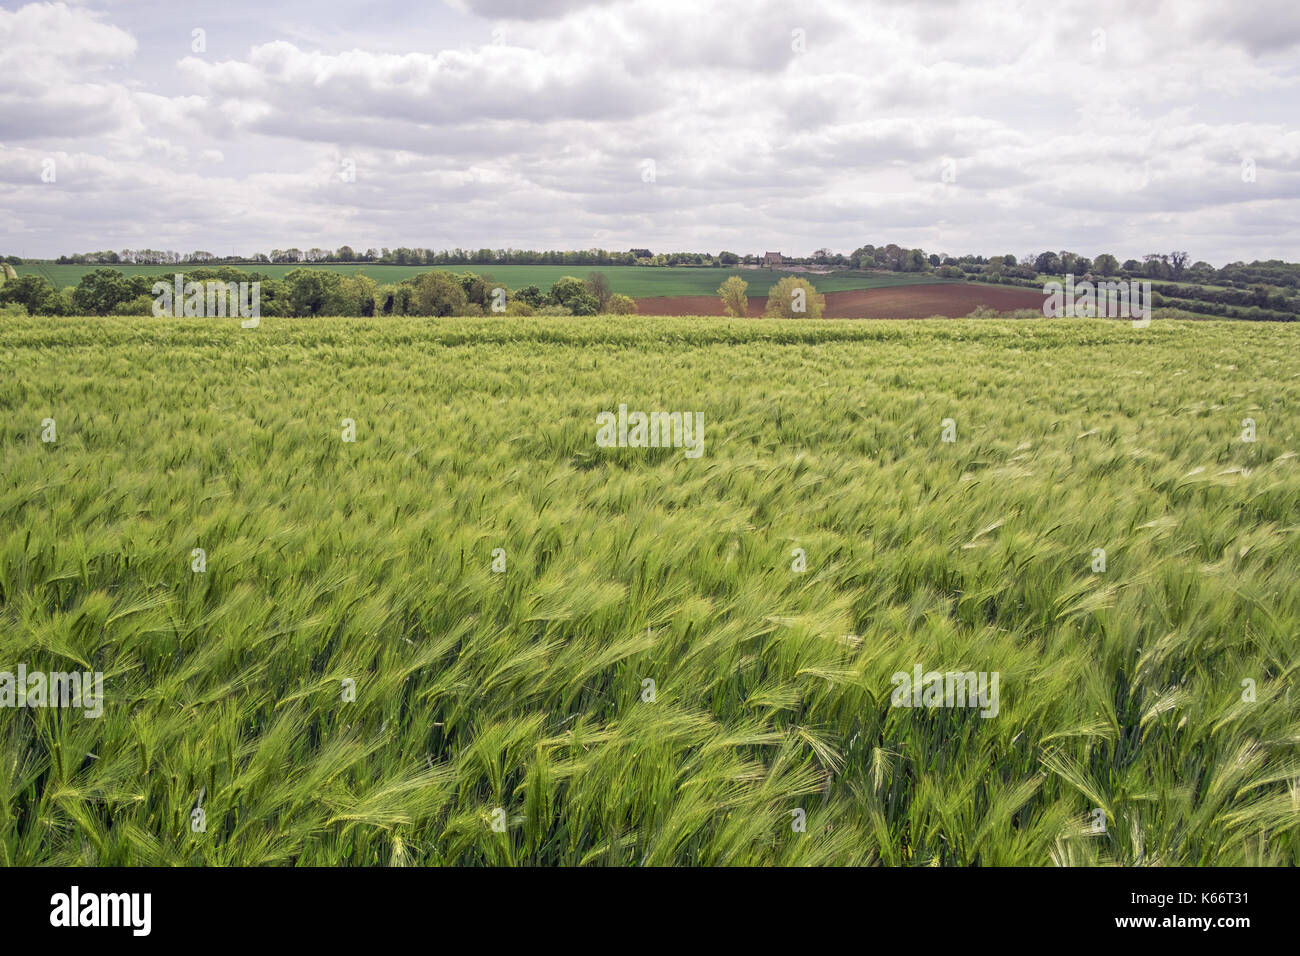 Wheat crop in Nothamptonshire United Kingdom Stock Photo